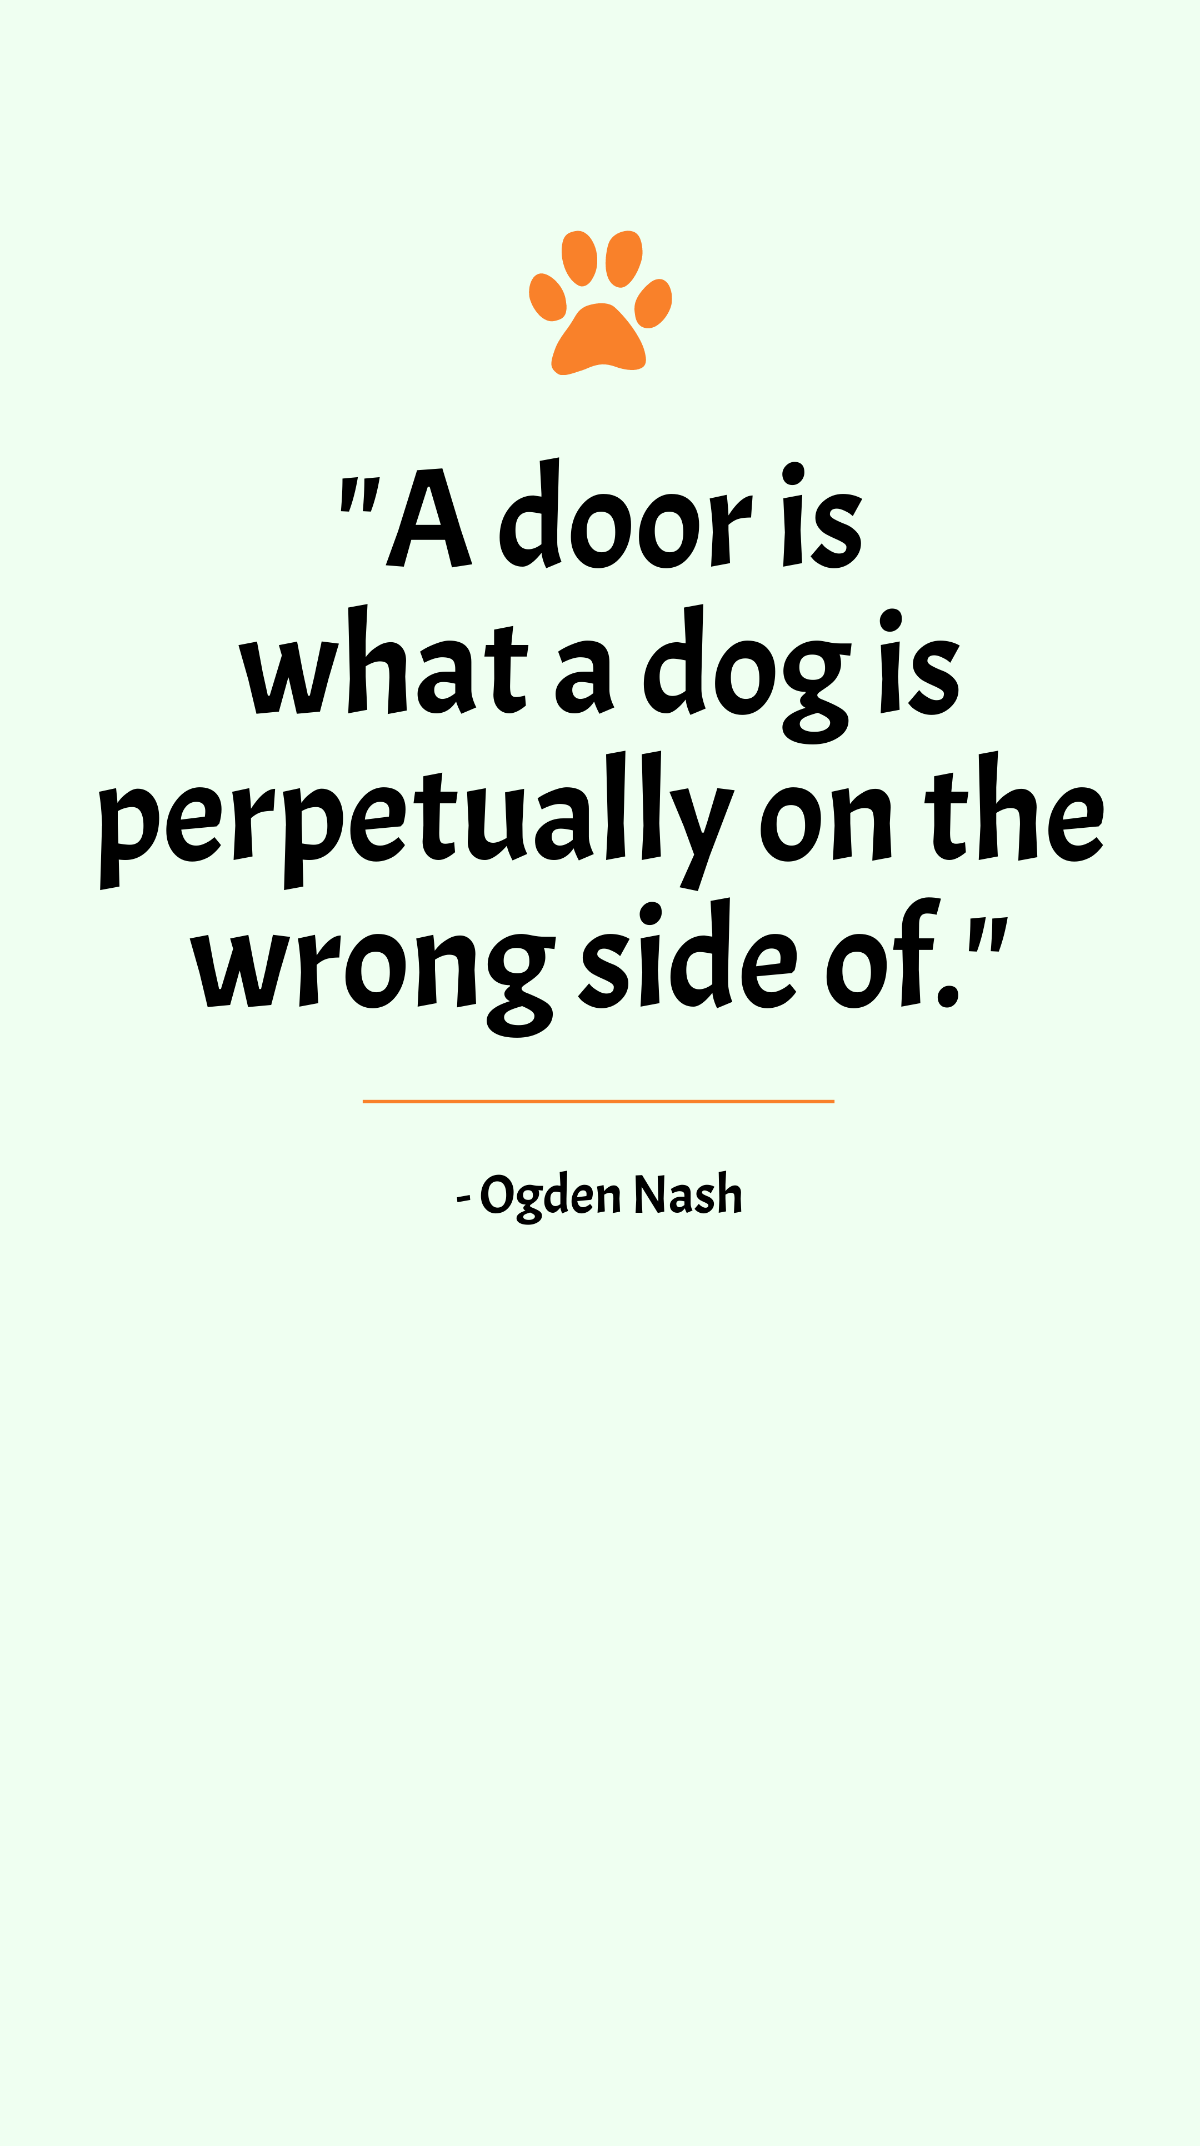 Free Ogden Nash - A door is what a dog is perpetually on the wrong side of. Template